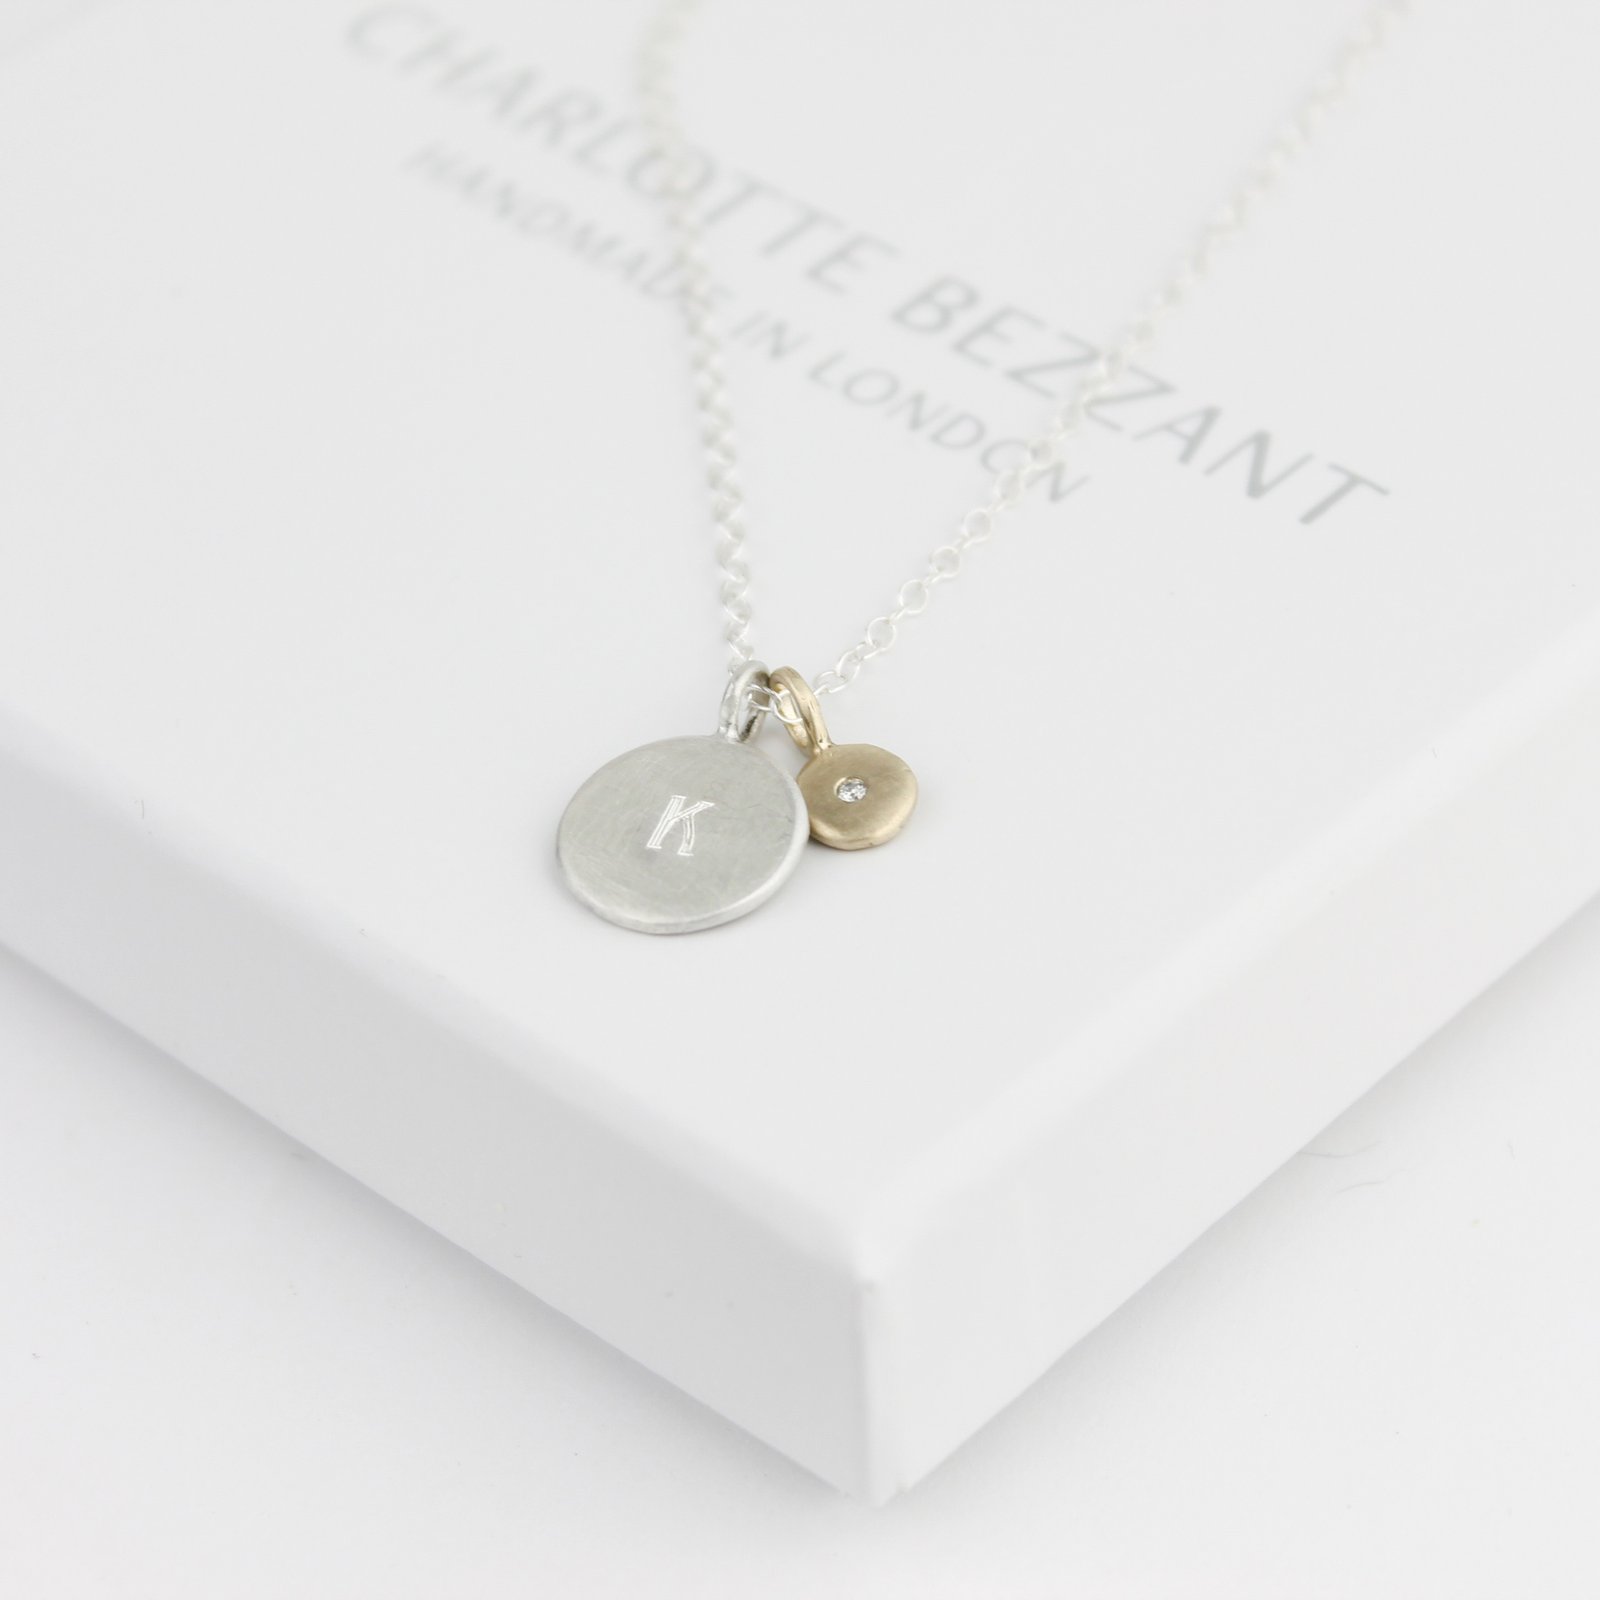 Personalised Diamond Cross Necklace In Sterling Silver By Claudette Worters  | notonthehighstreet.com